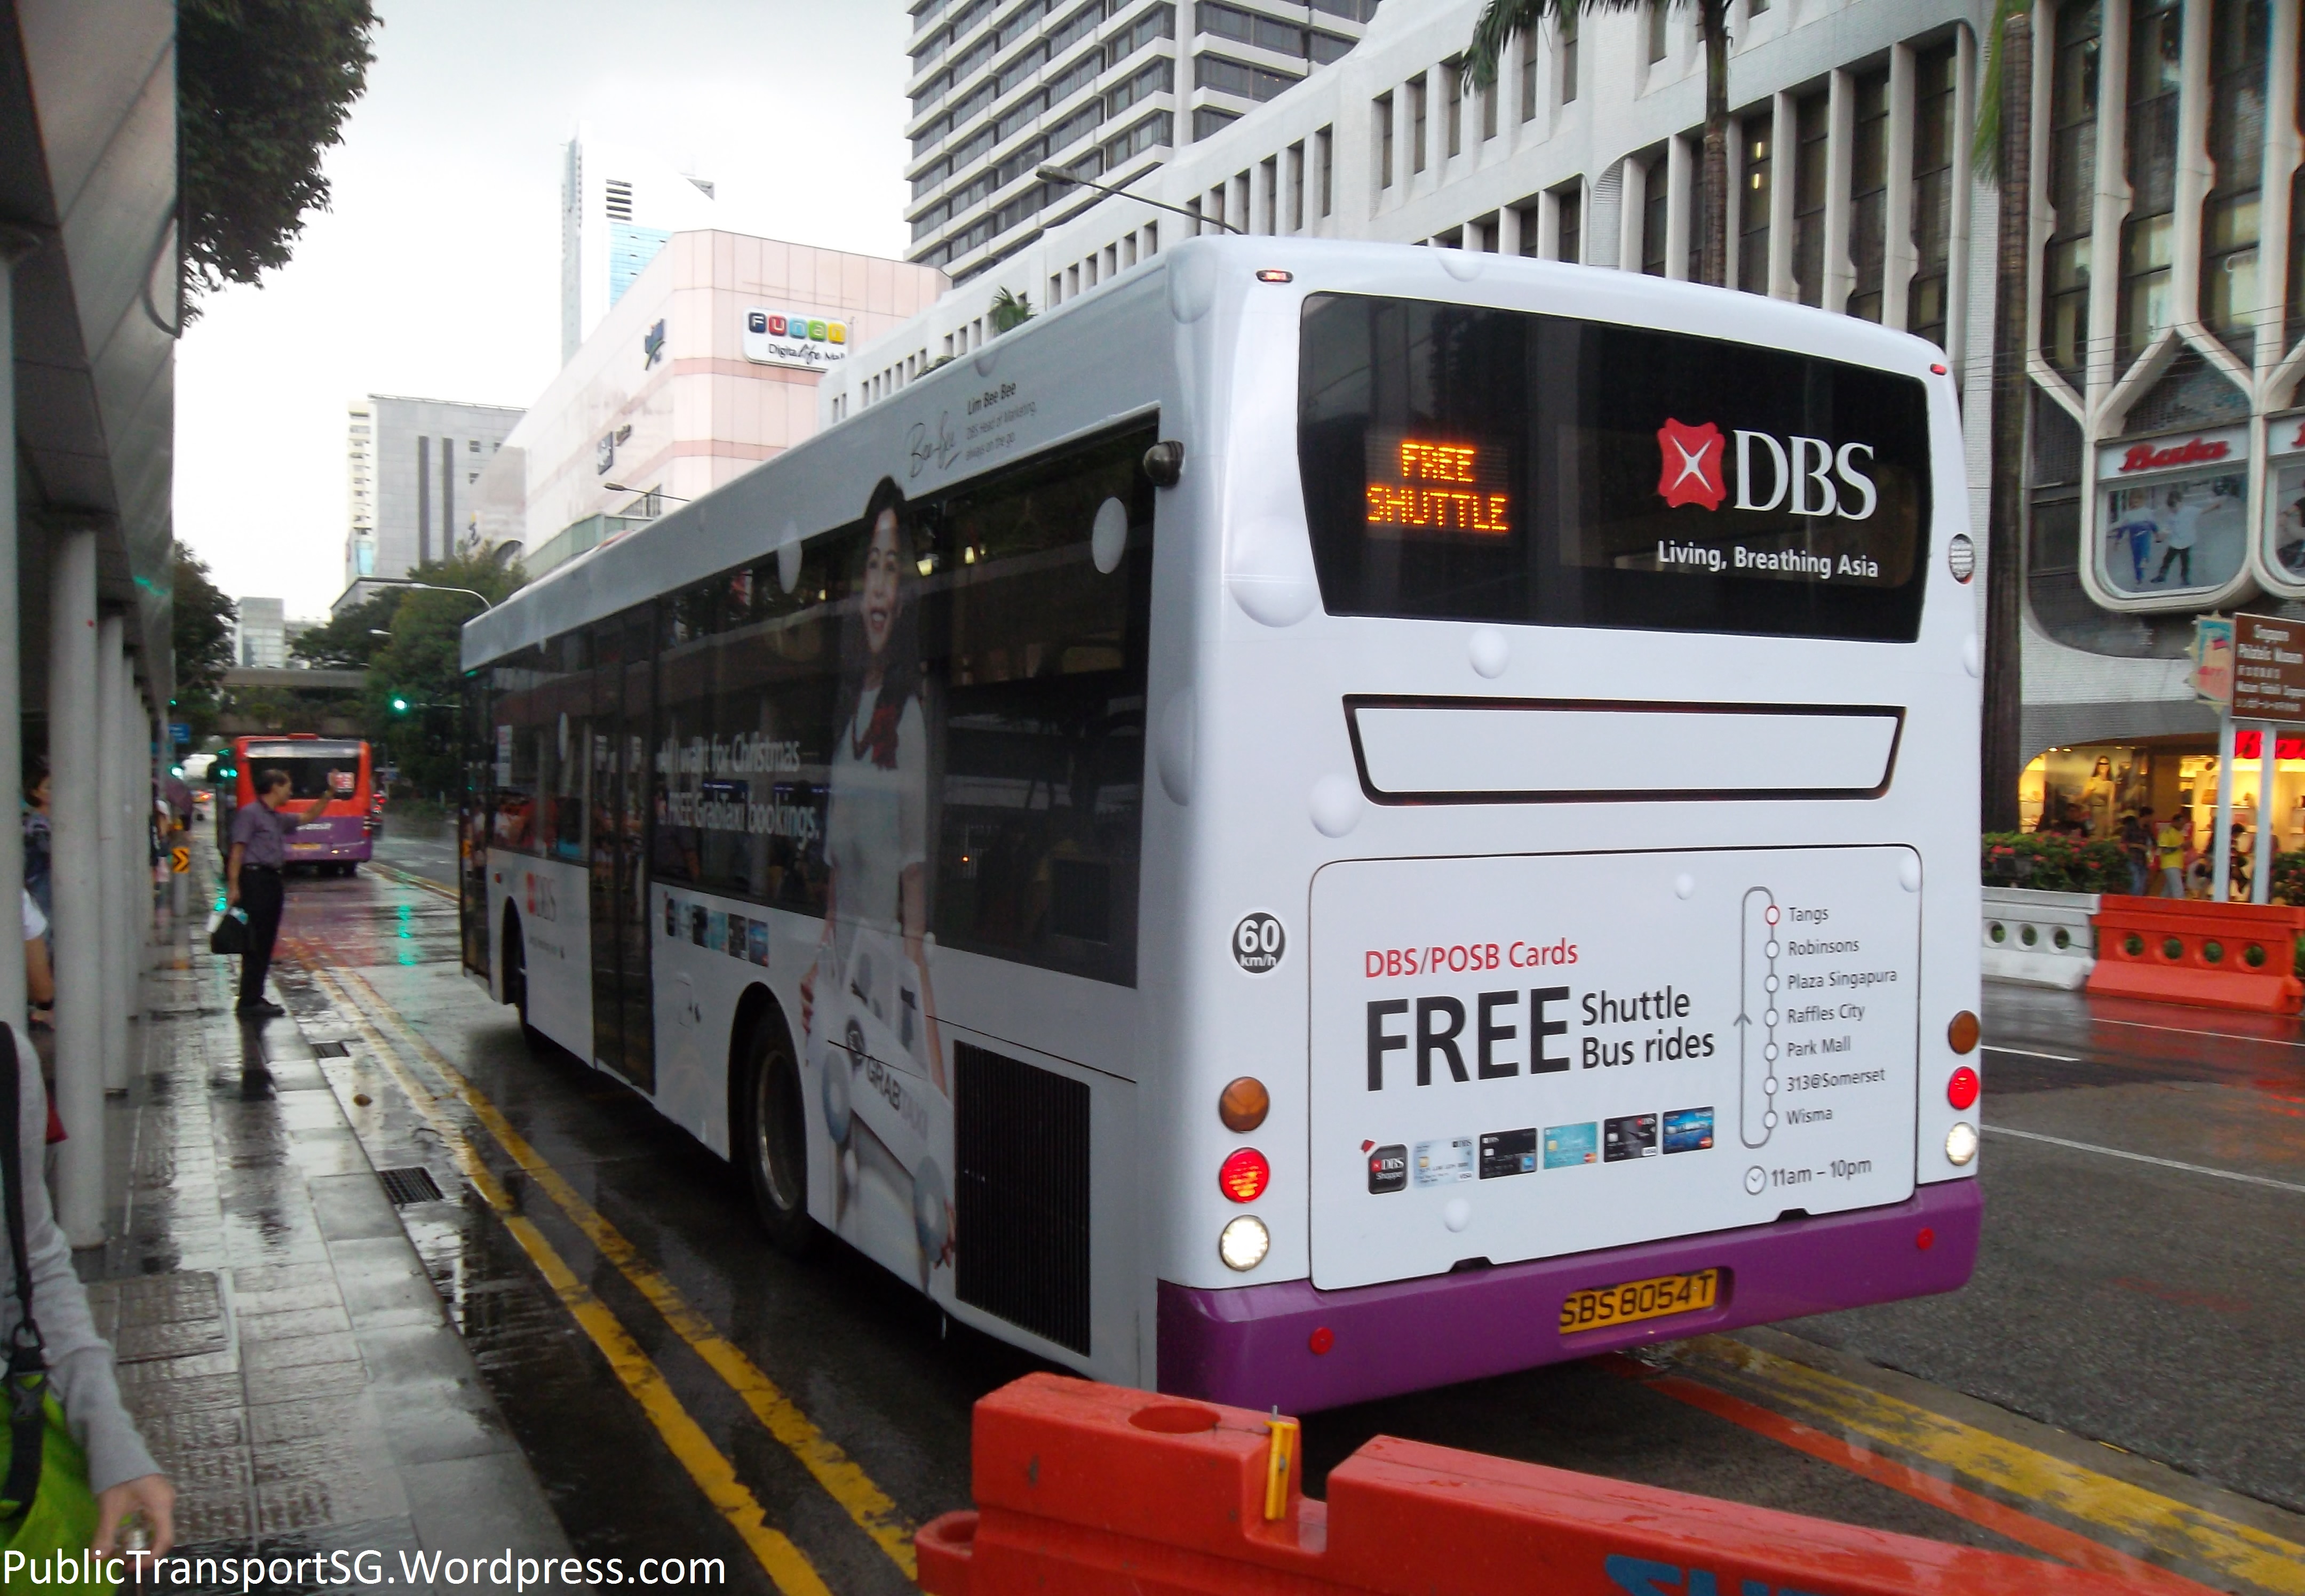 The rear of SBS8034T, one of the shuttle buses, with the DBS Bank Christmas Bus advertisement.